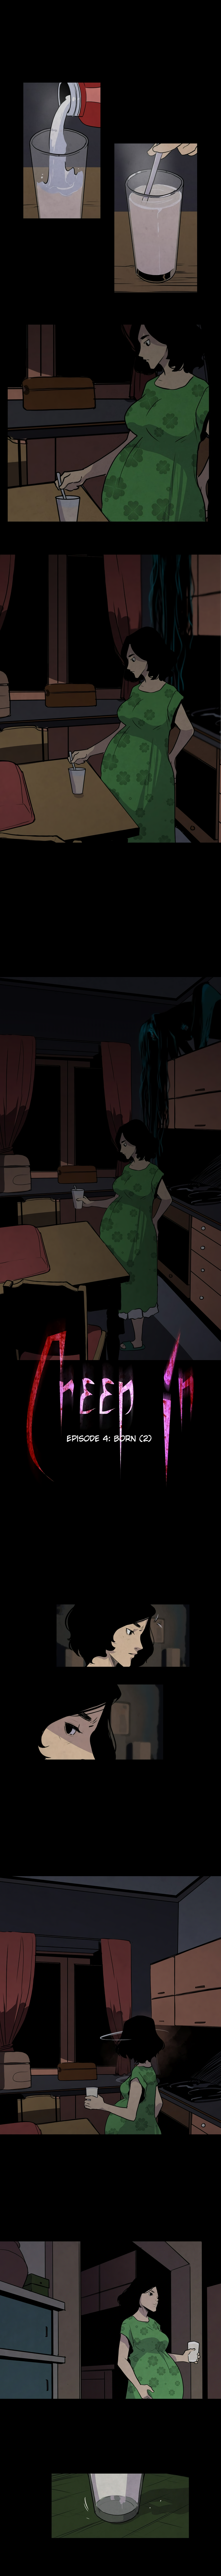 Creep In - Page 2